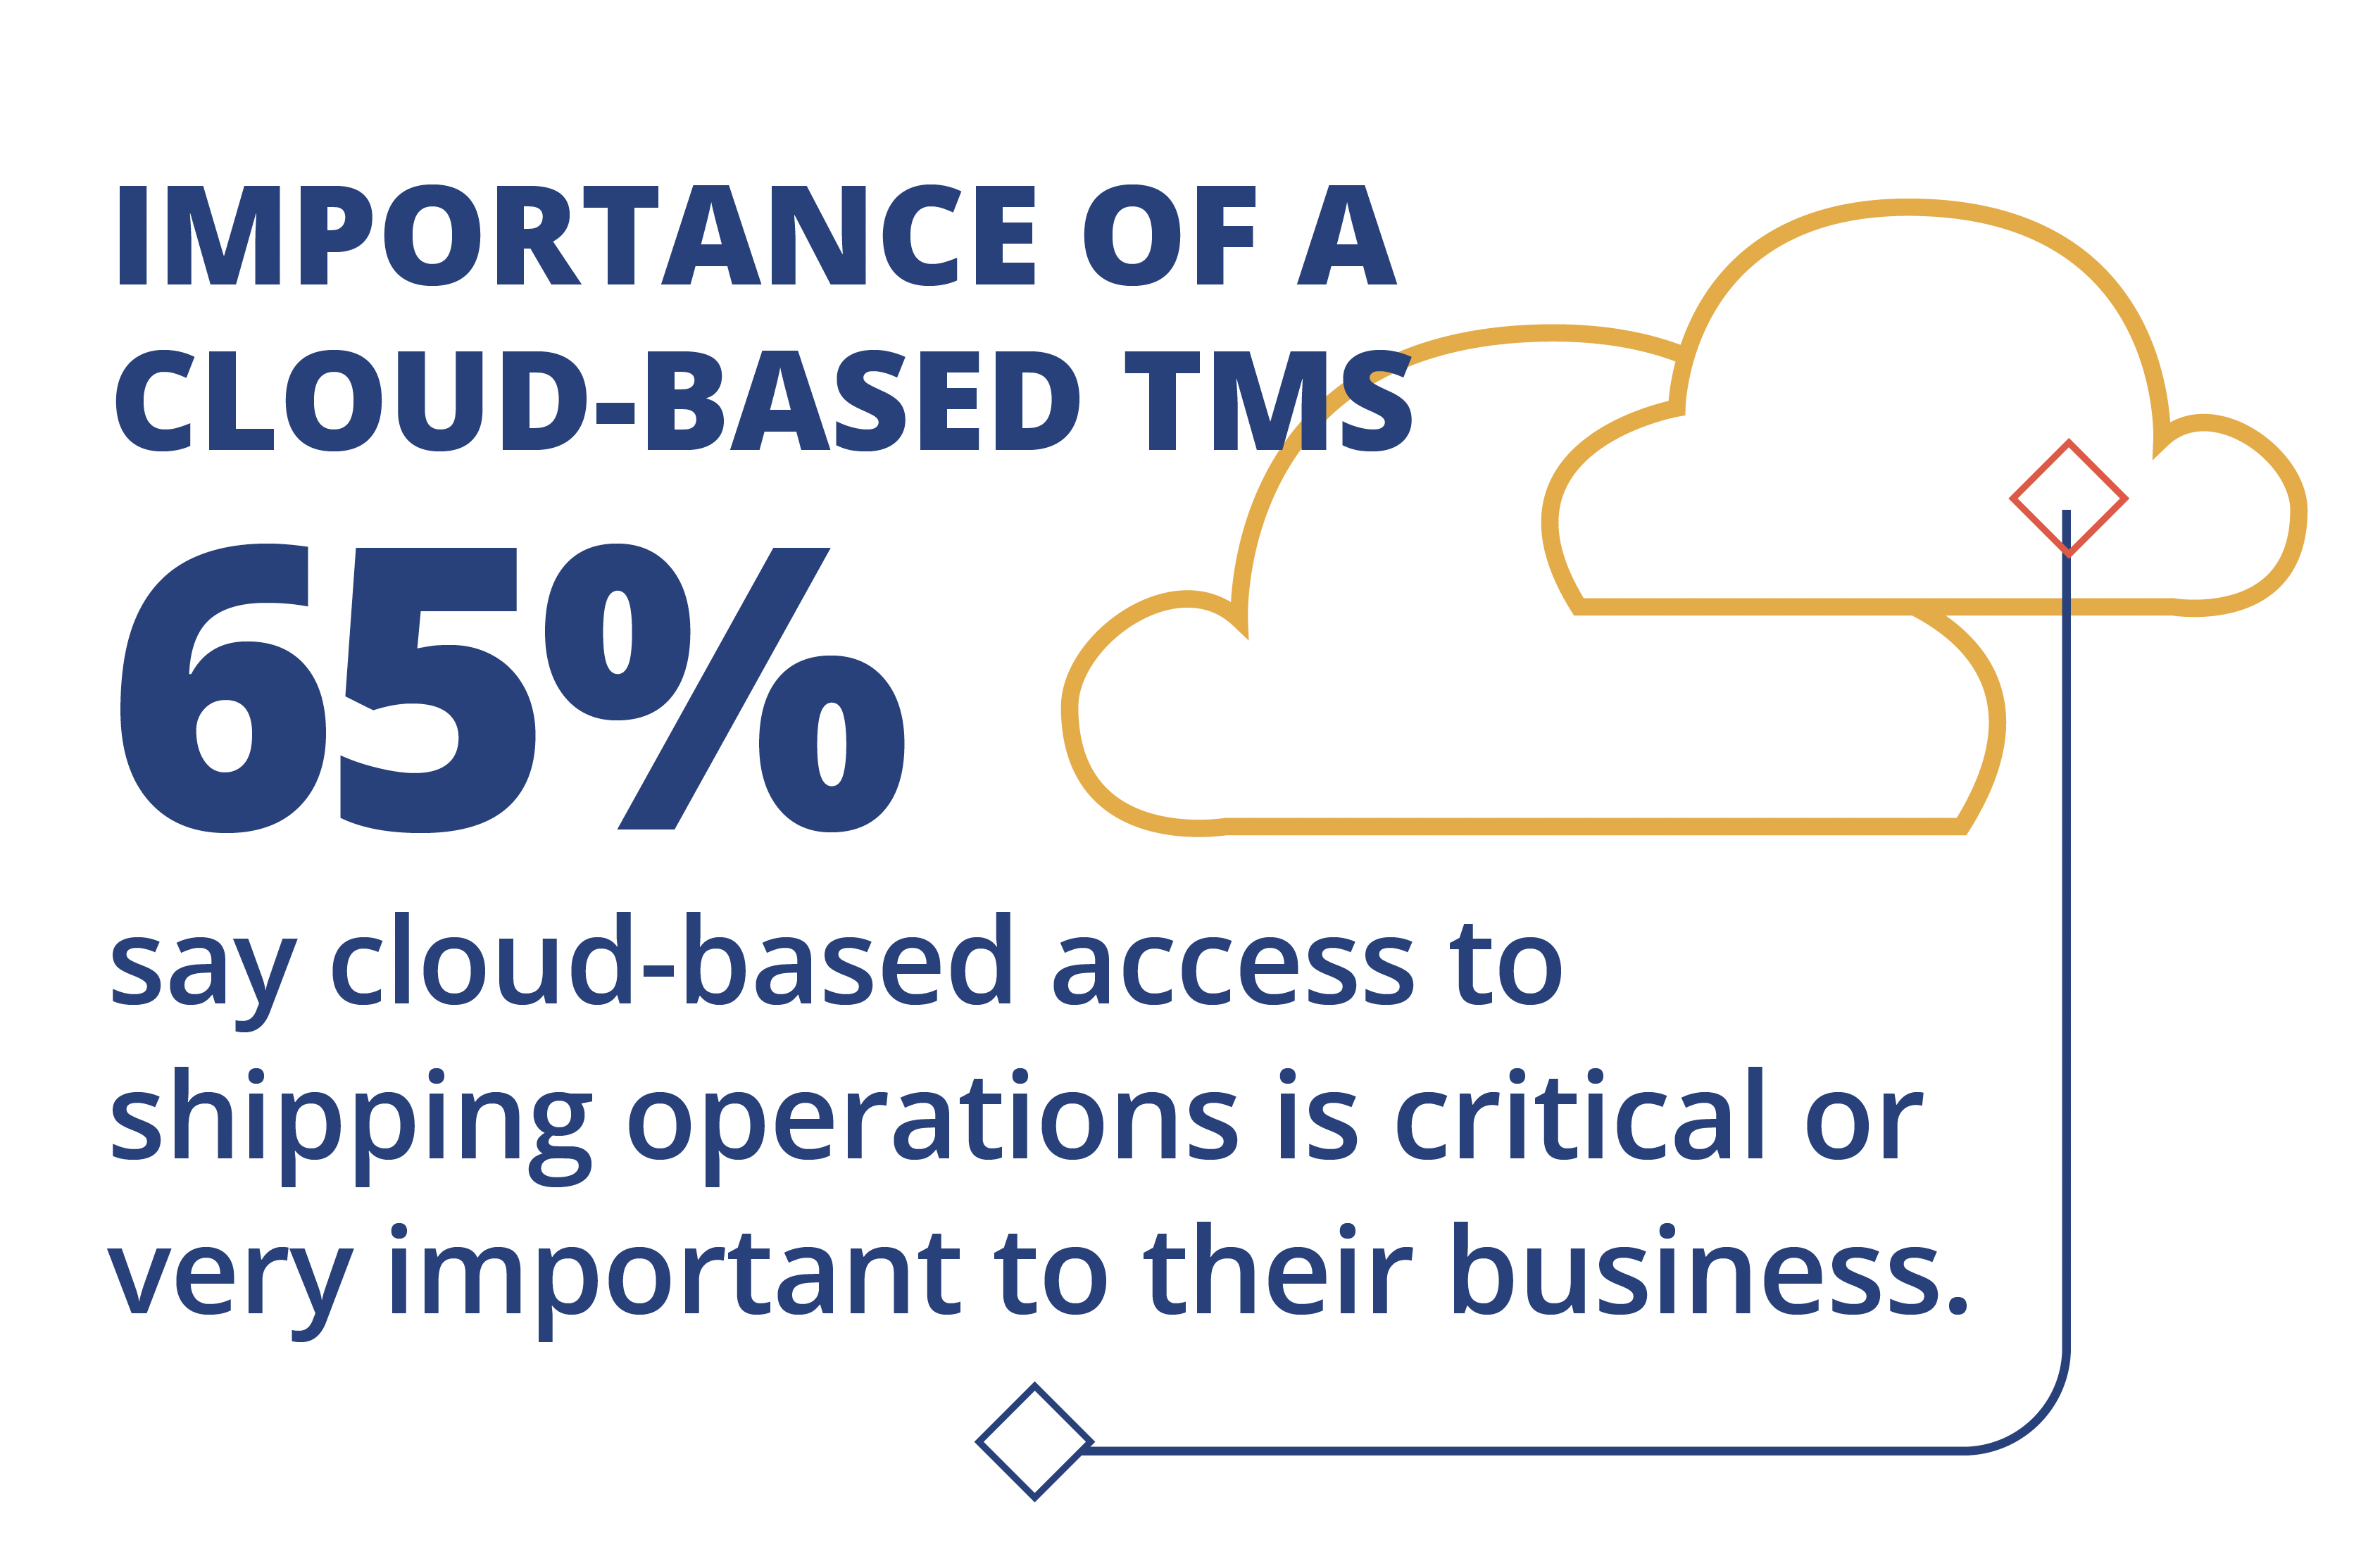 65% say cloud-based access to shipping operations is critical or very important to their business.